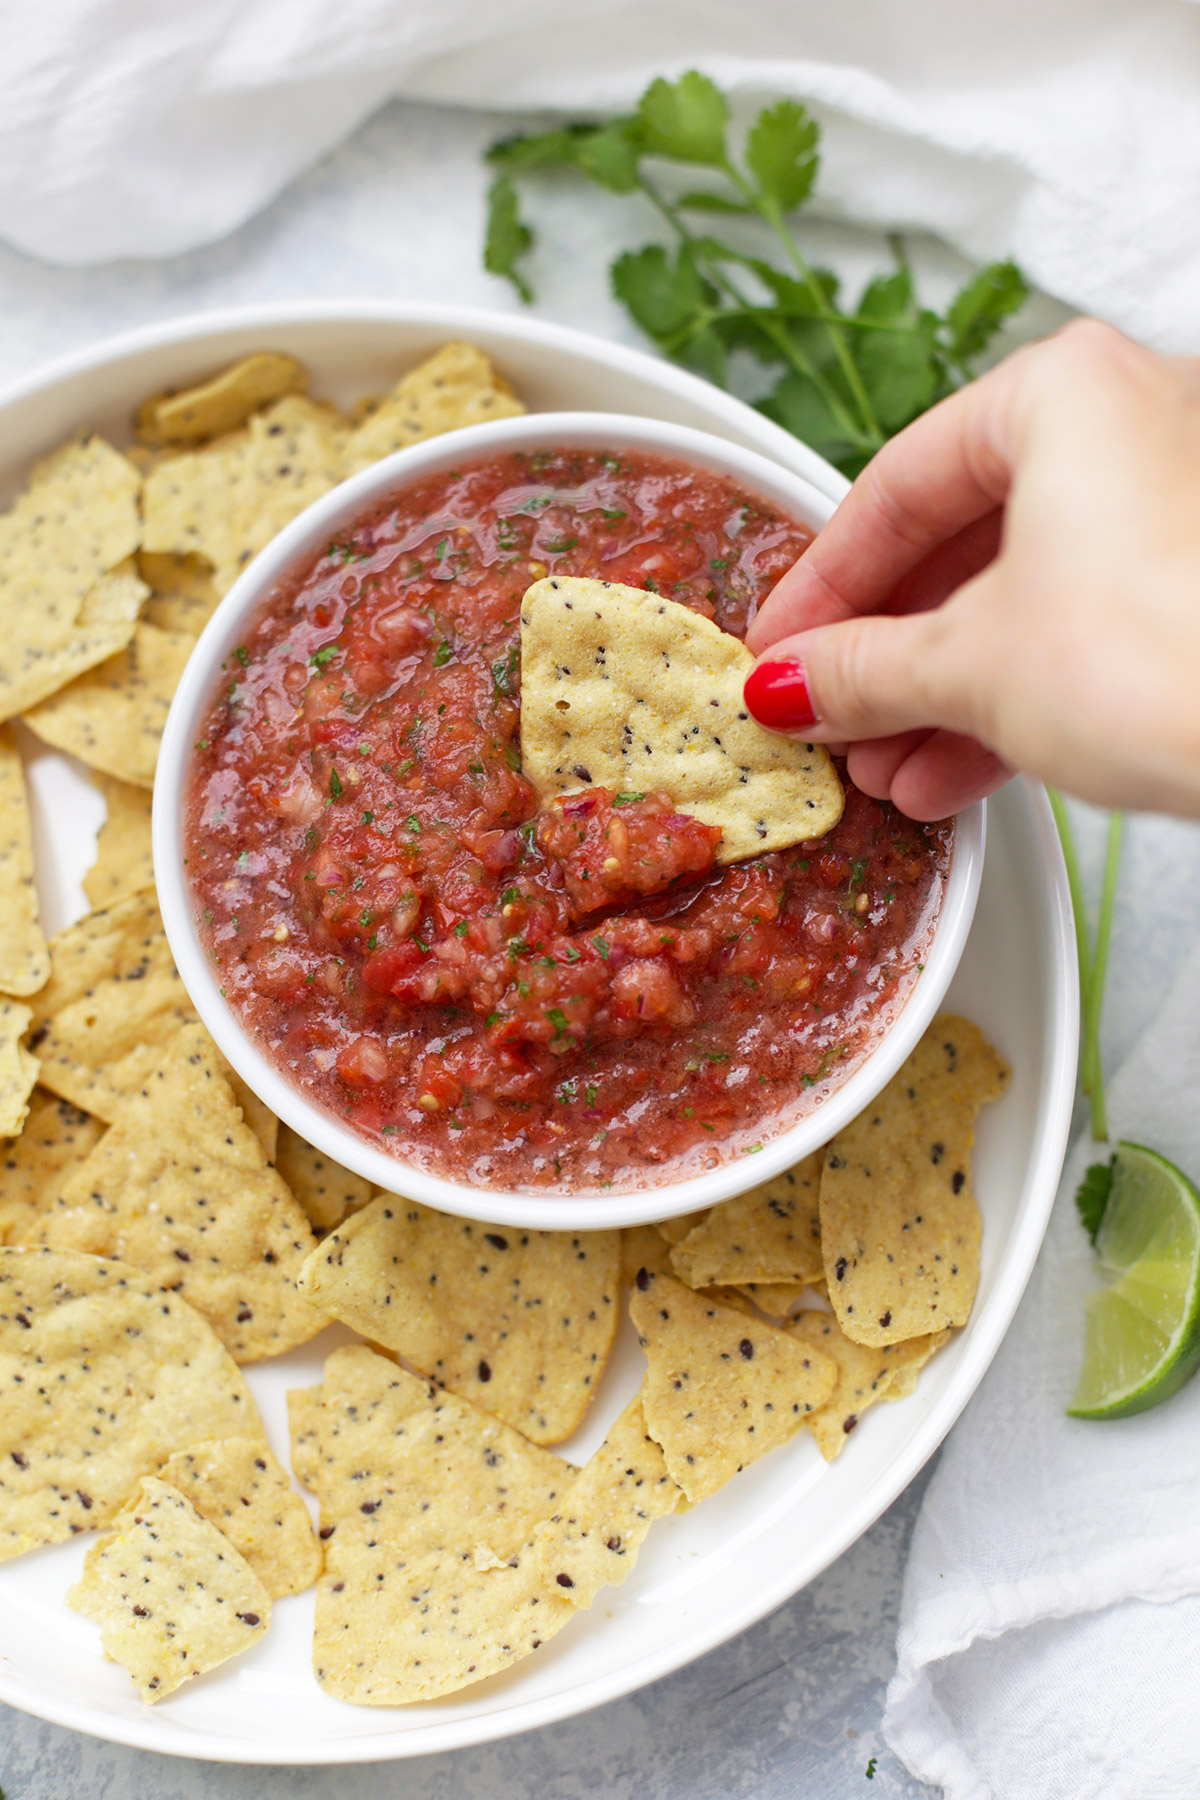 This is our FAVORITE fresh salsa. Salsa fresca loaded with fresh, bright flavor. We love it! 